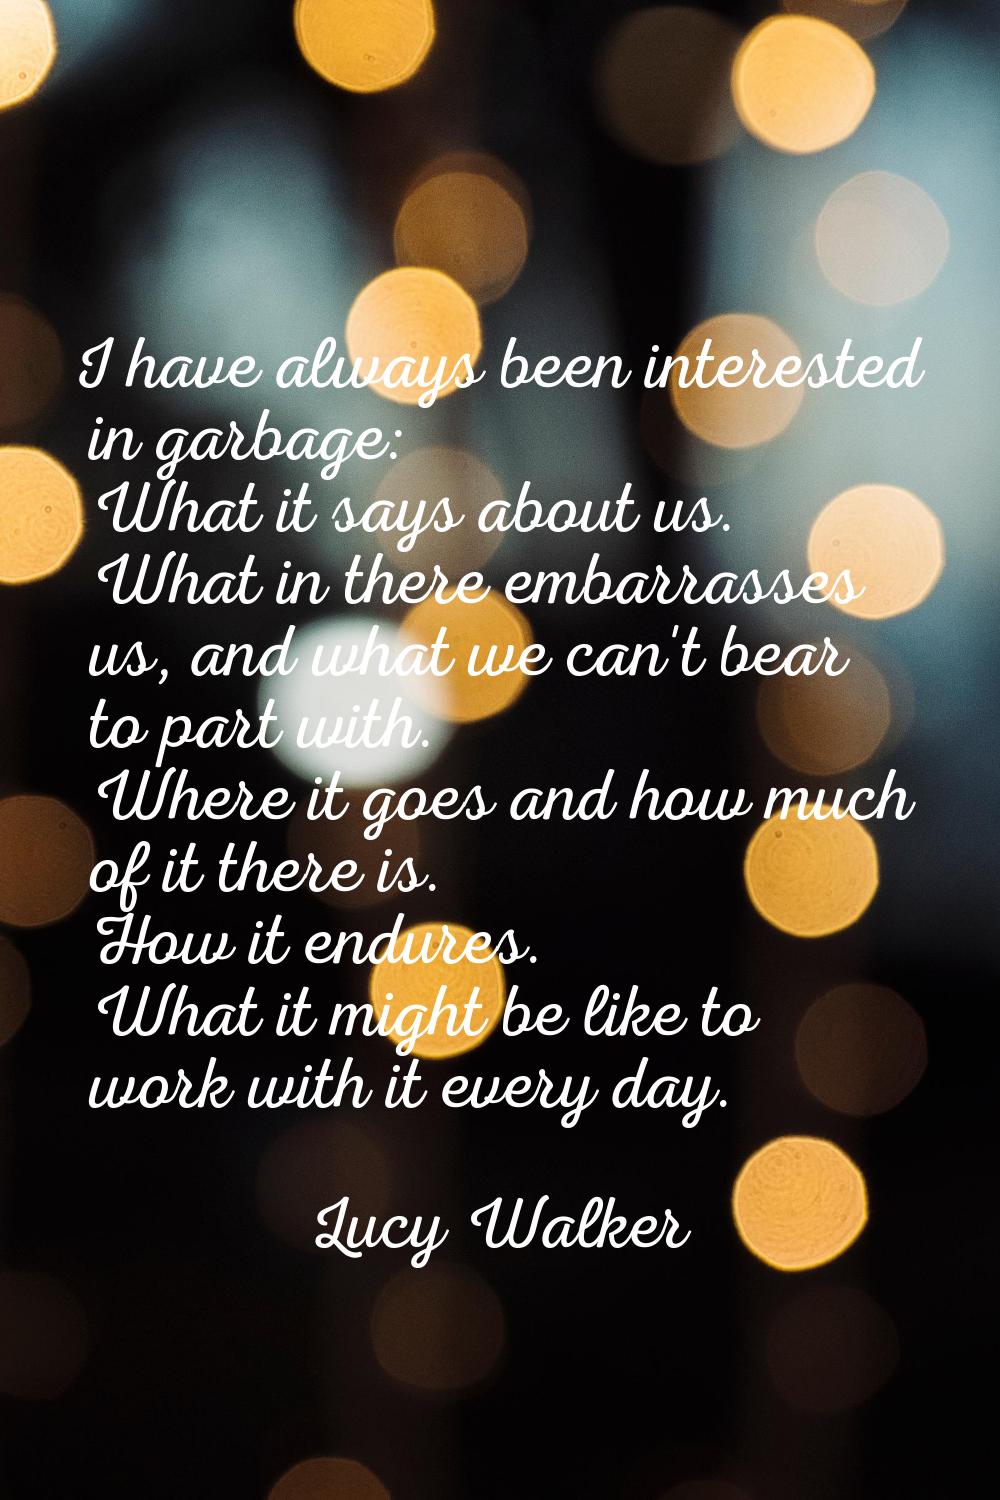 I have always been interested in garbage: What it says about us. What in there embarrasses us, and 